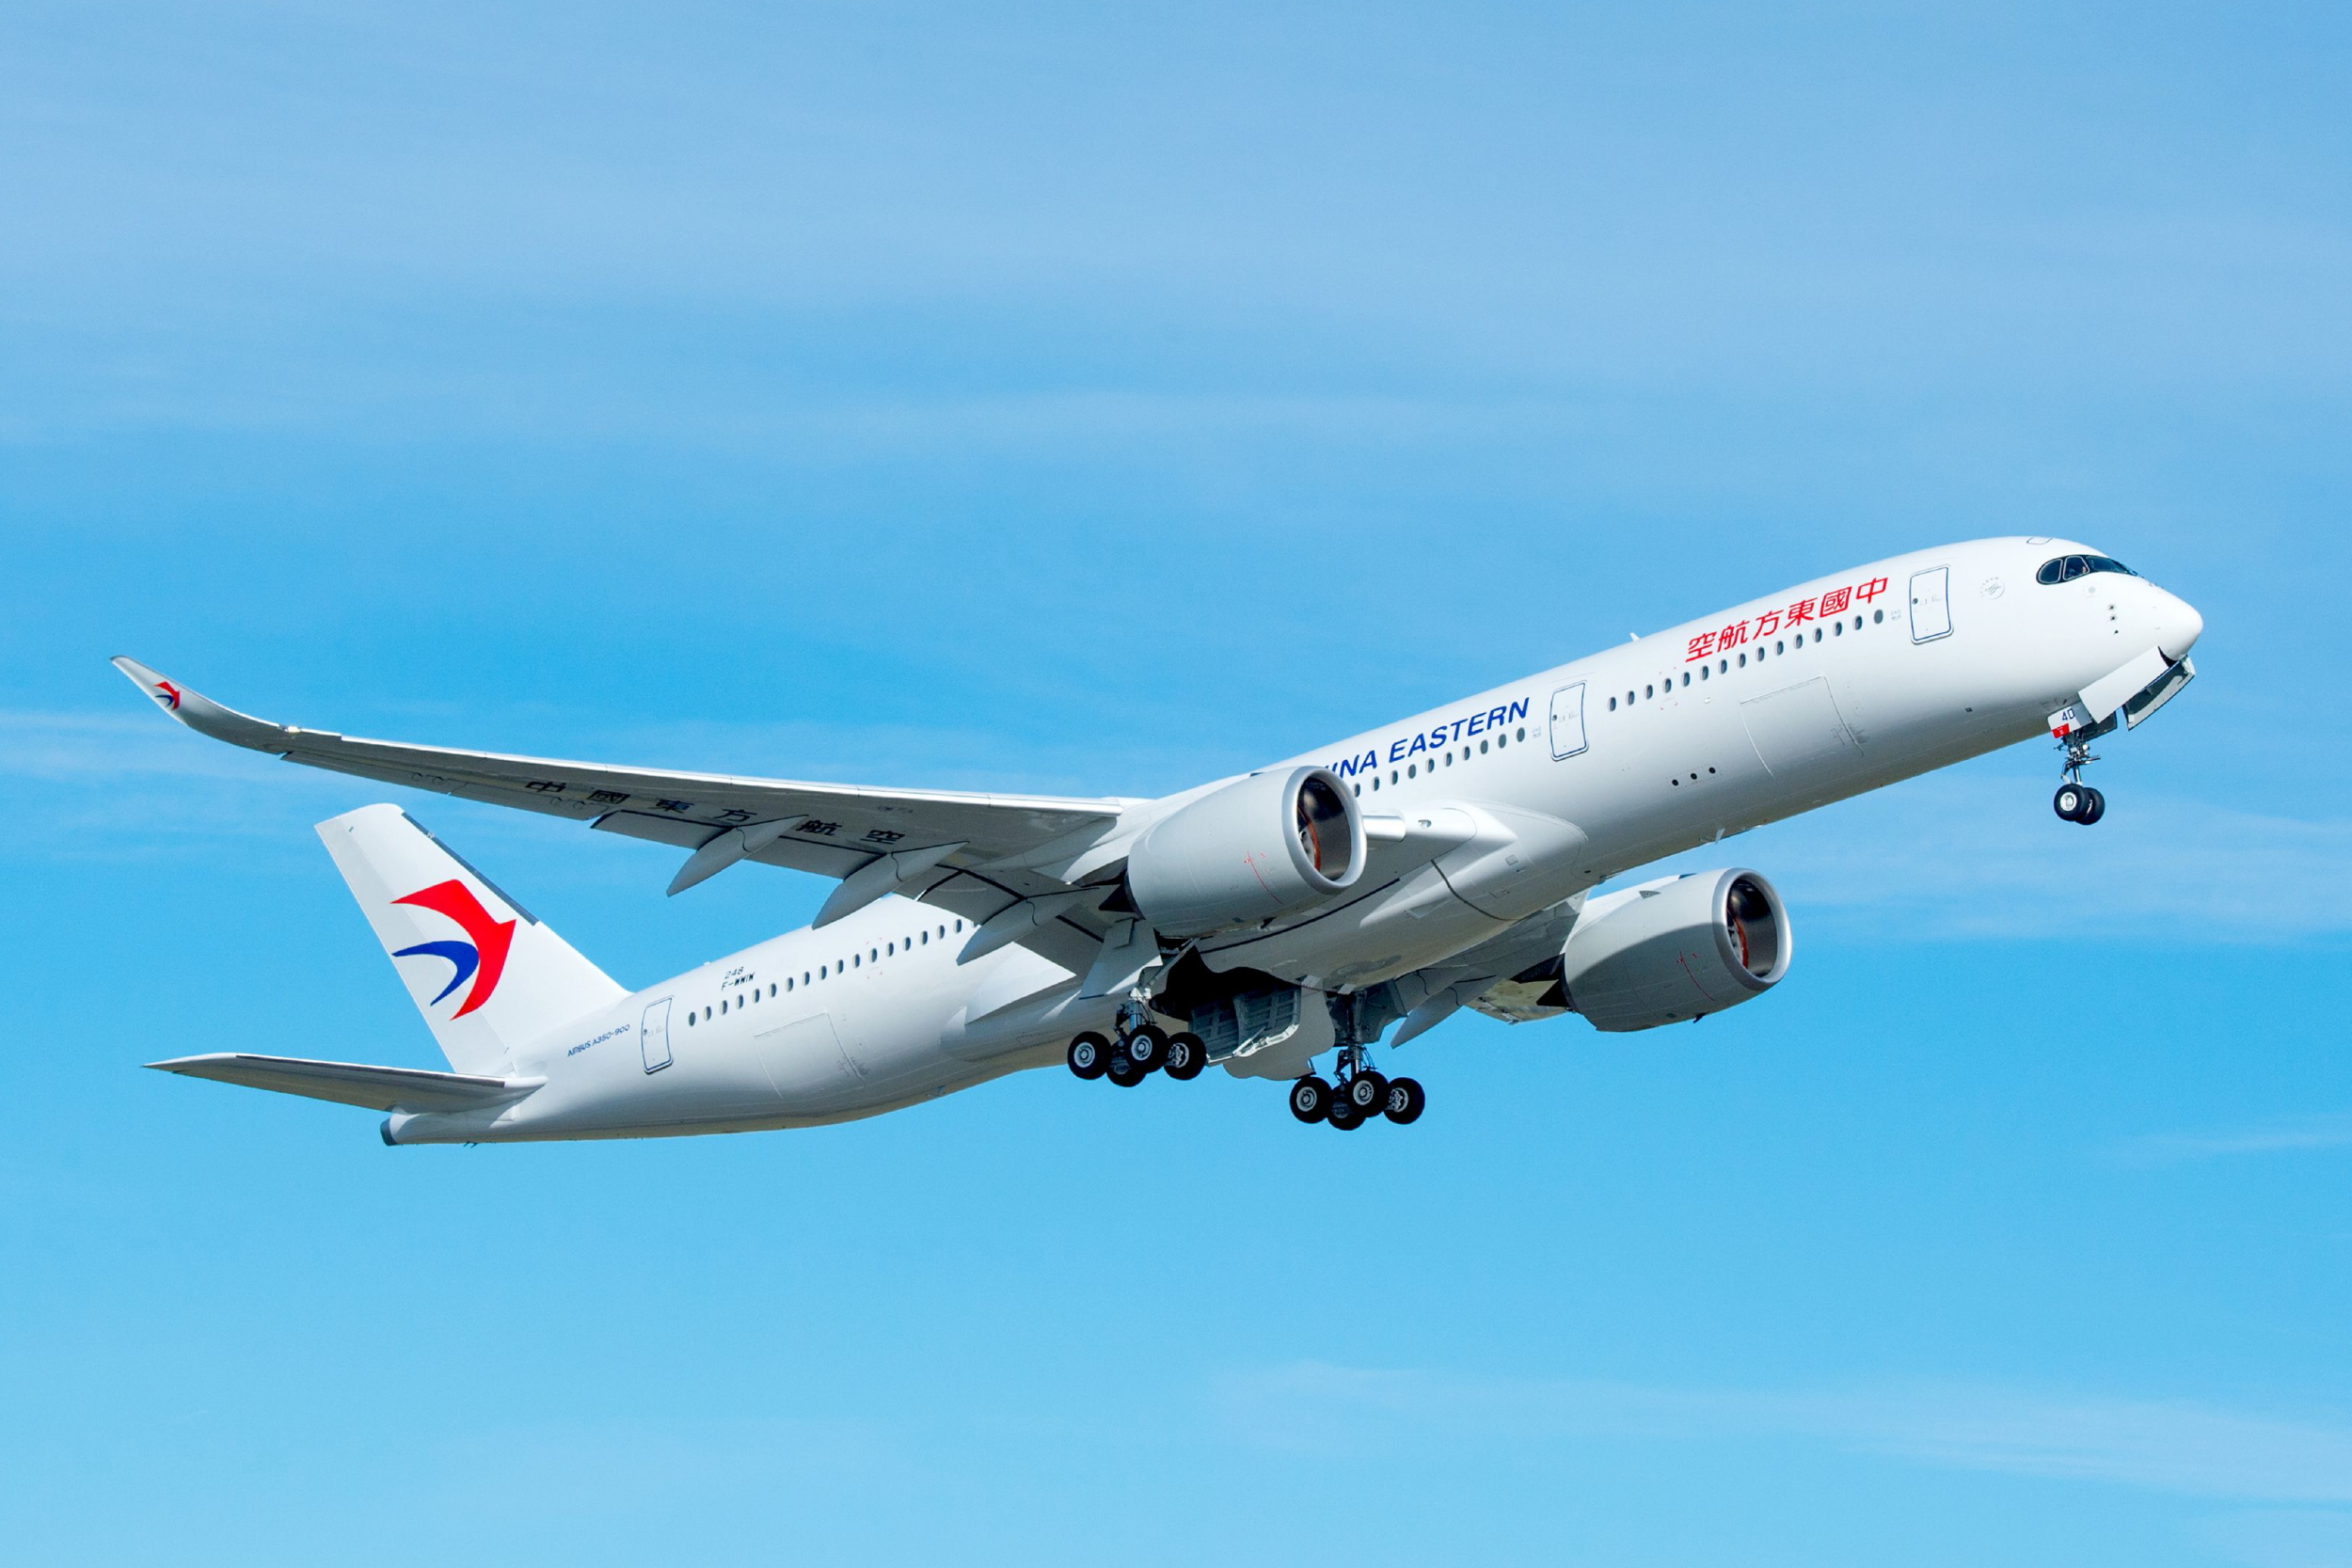 China Eastern A350-900. Click to enlarge.